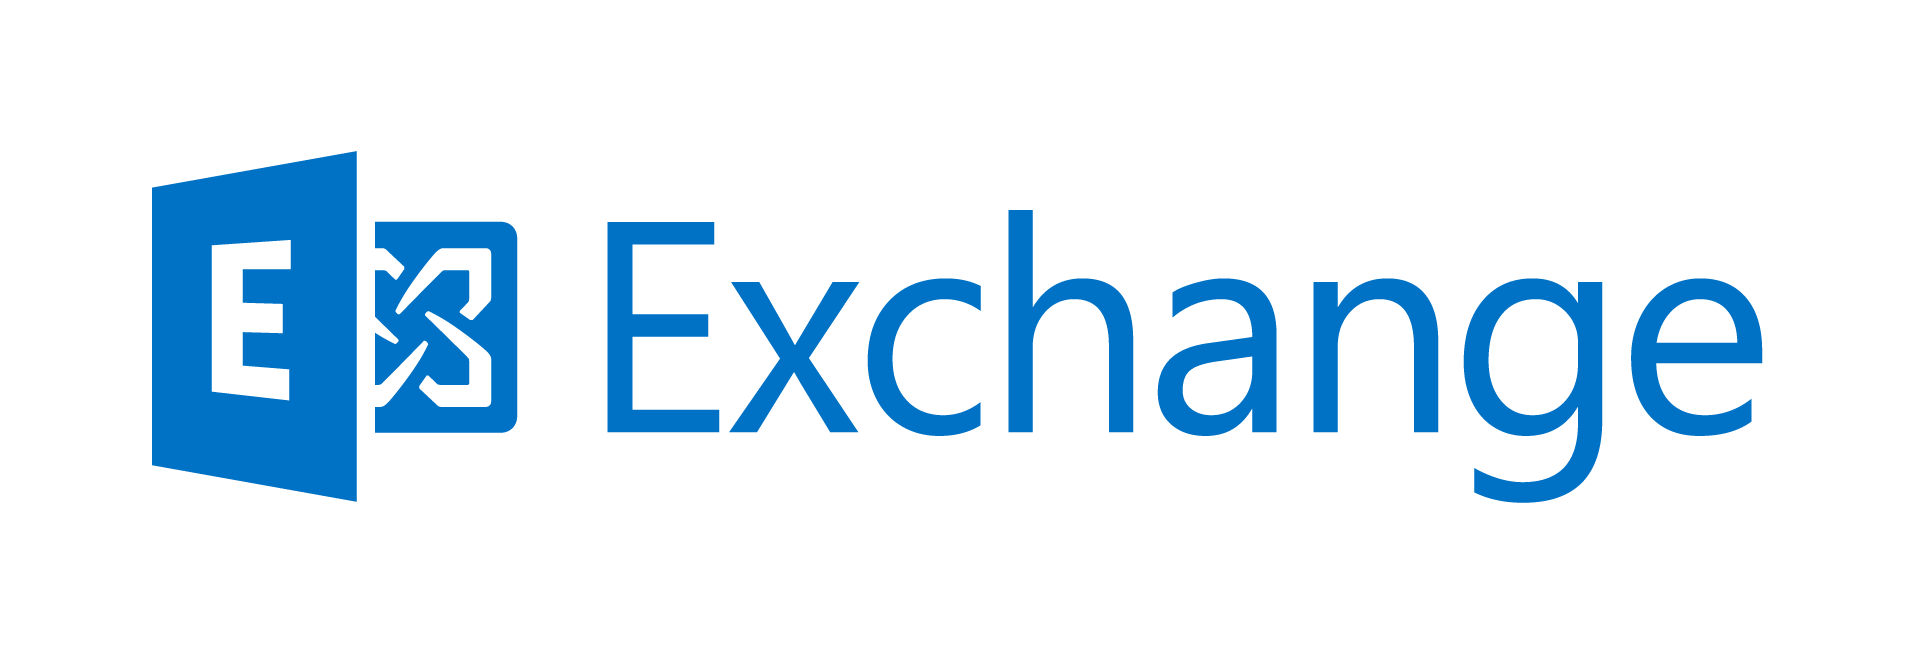 Scan into Microsoft Exchange